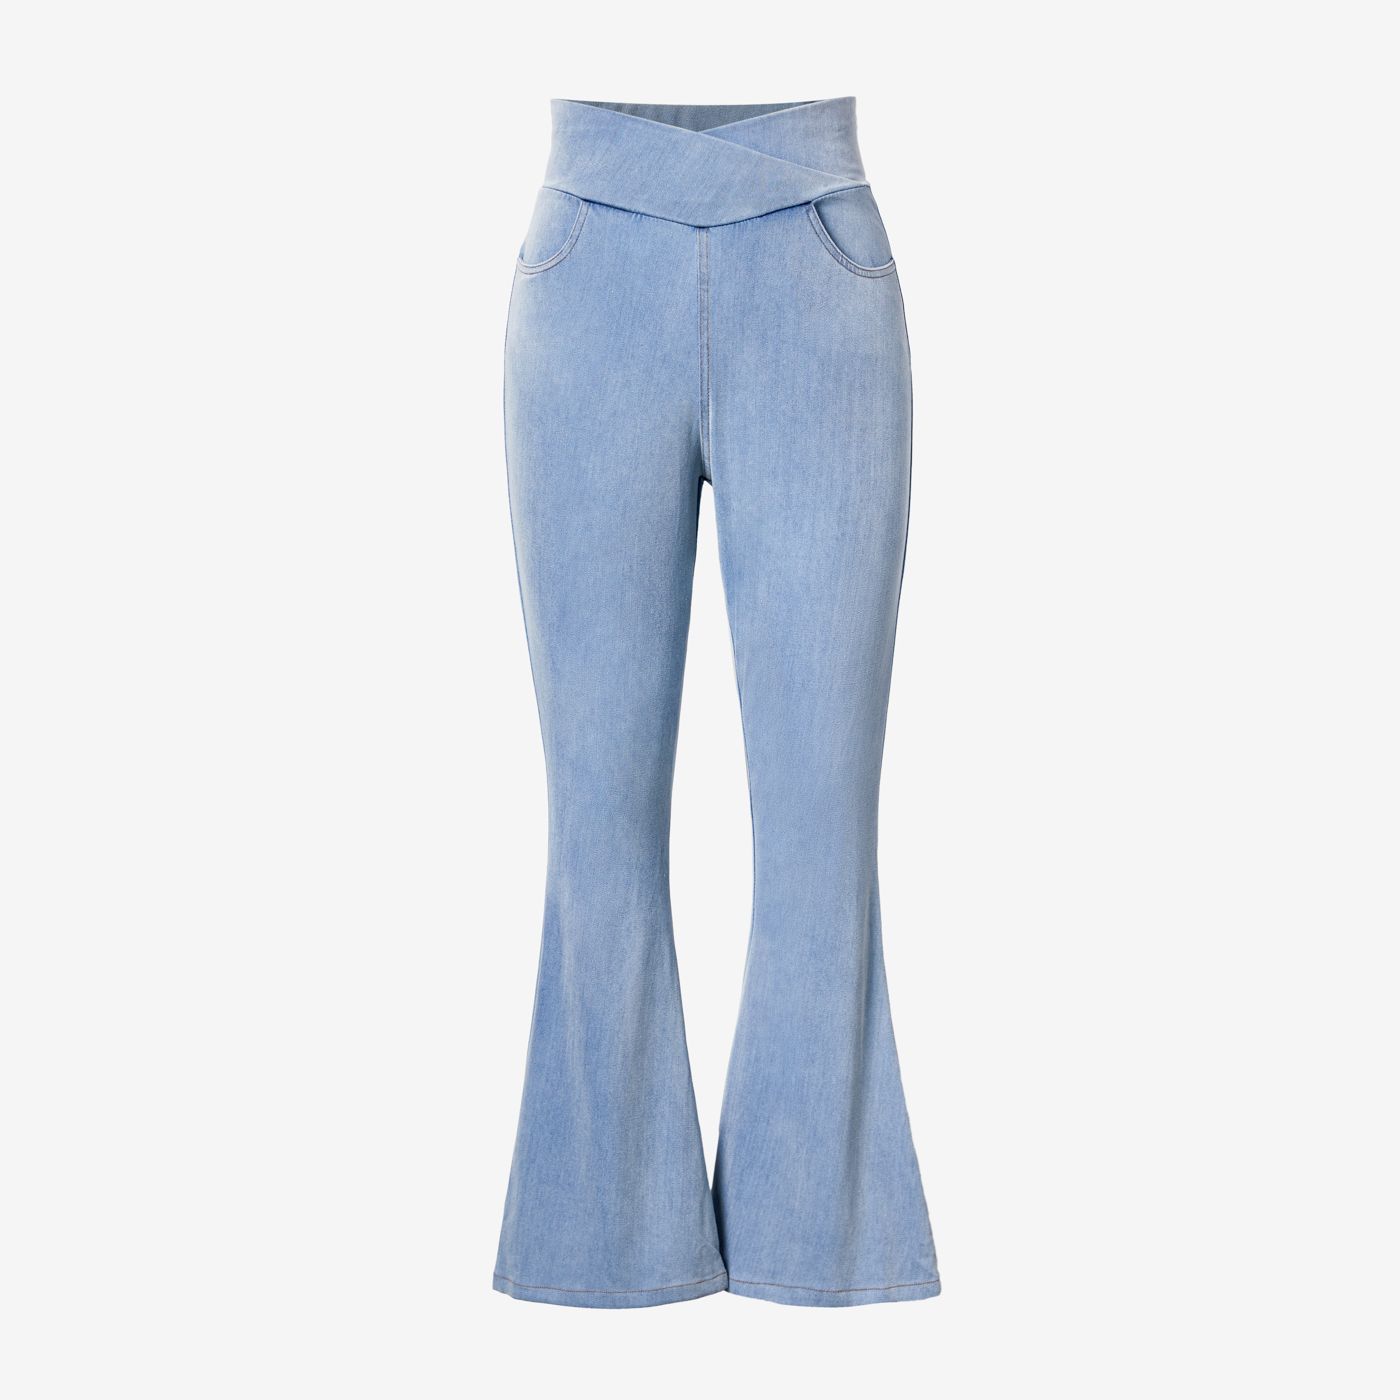 Mommy And Me Tight Denim Flares Pants